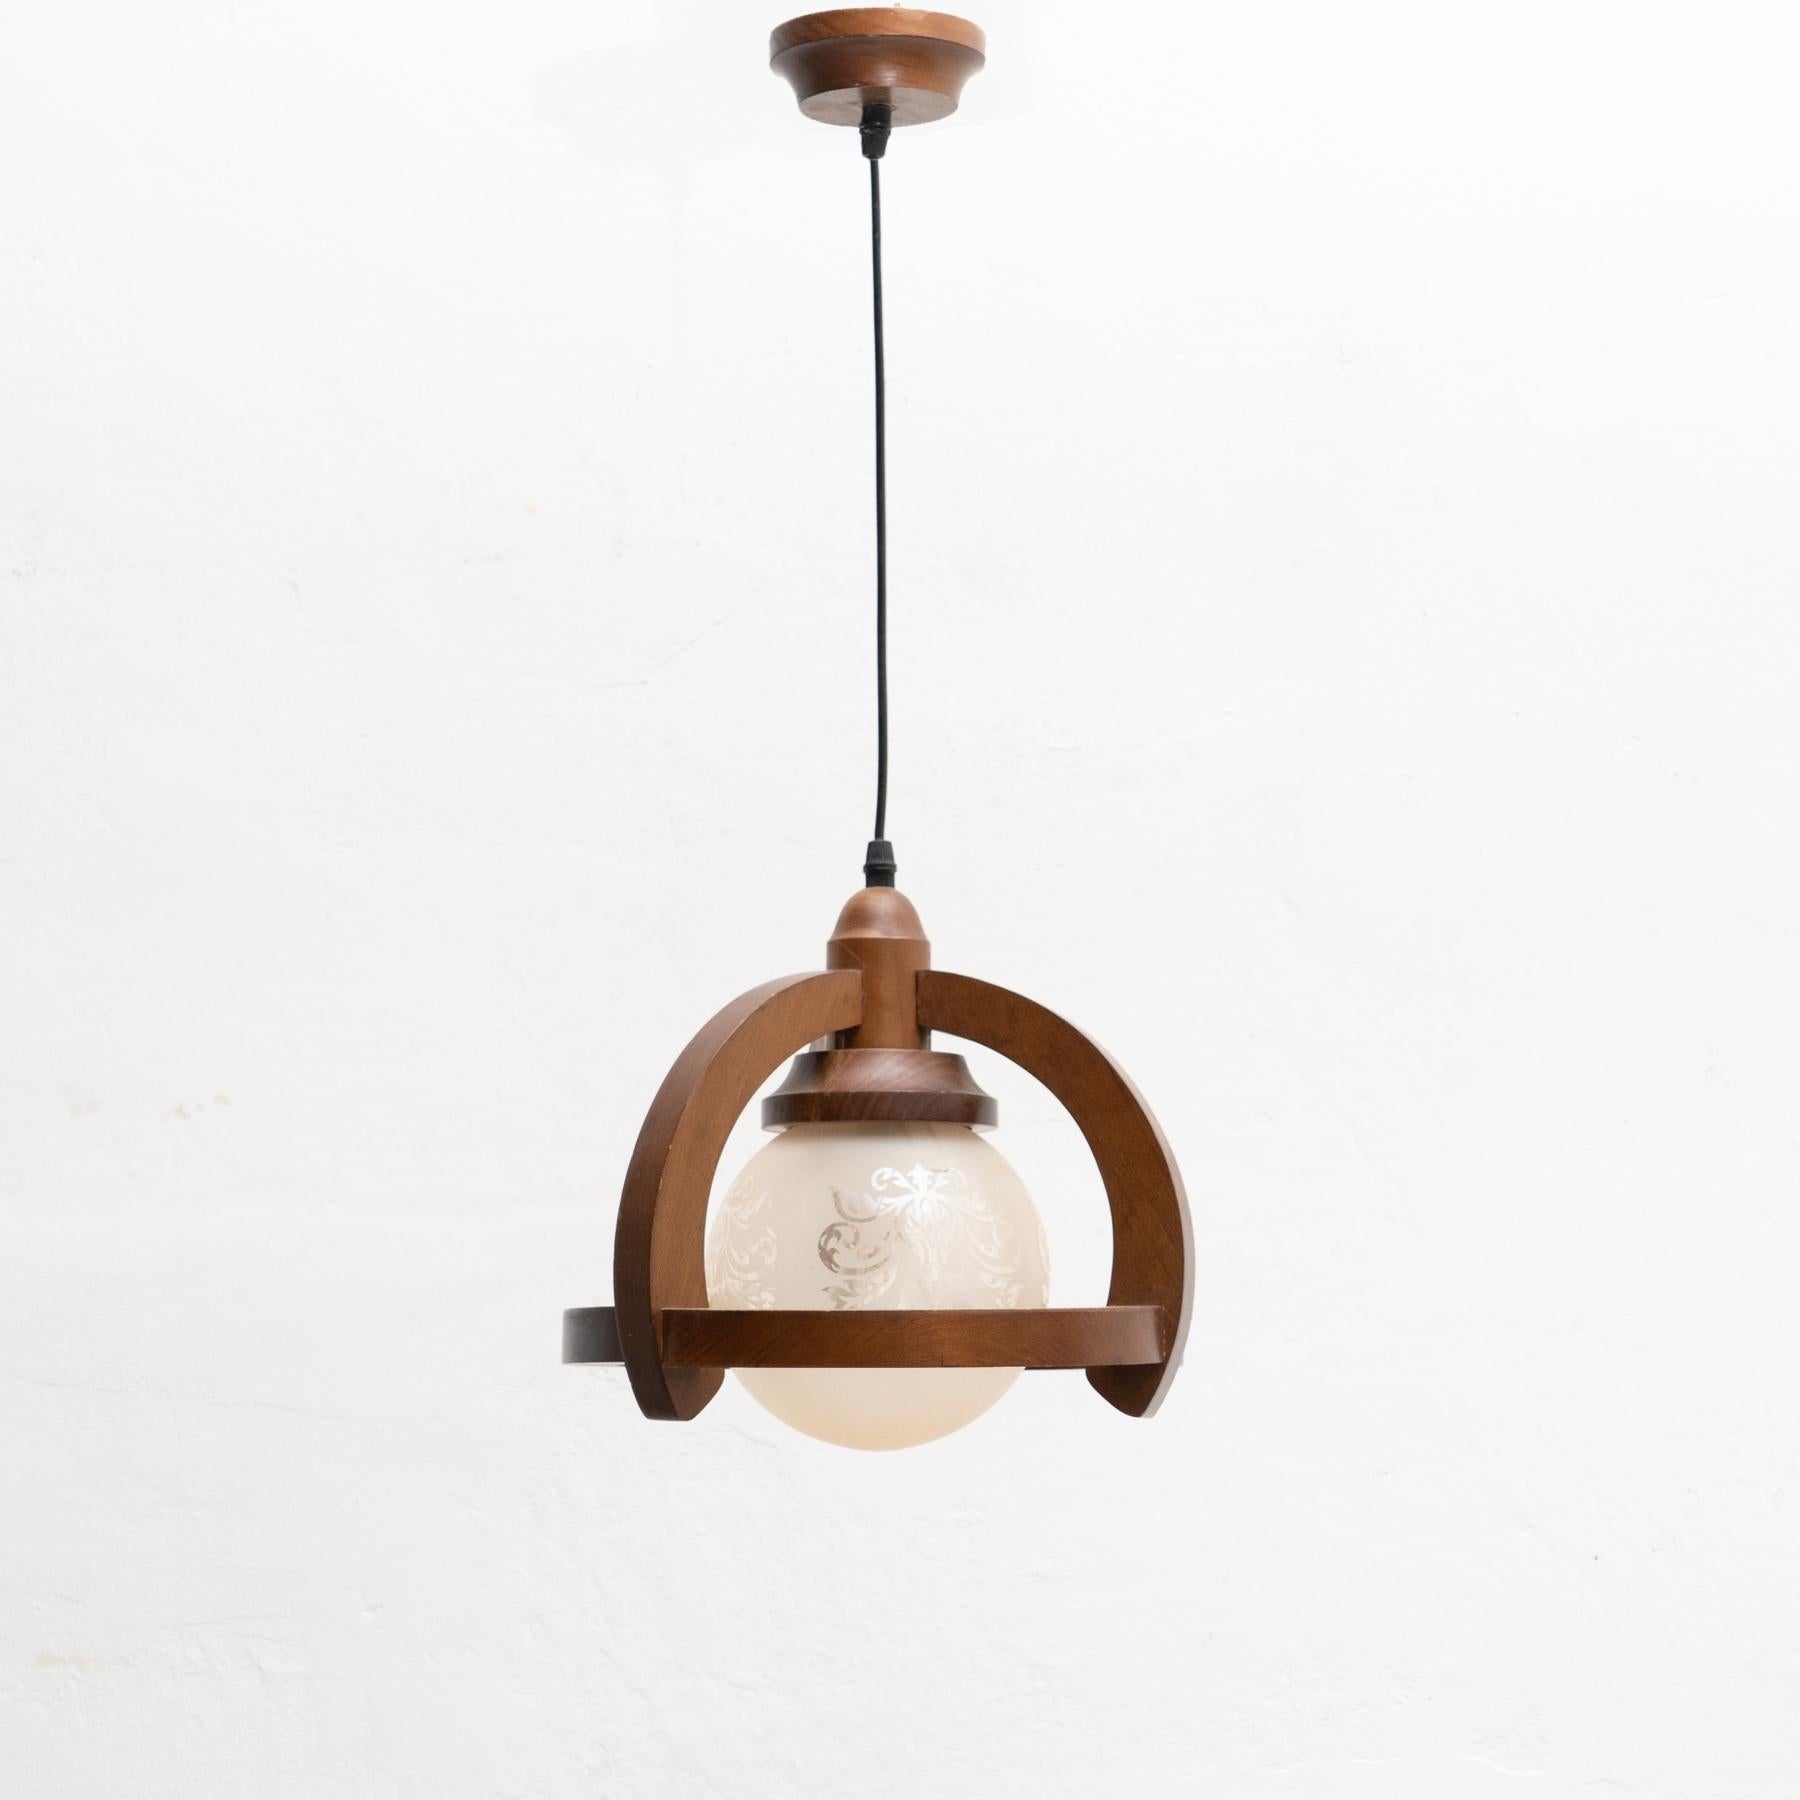 French vintage wooden and white glass decorated ceiling lamp.

By unknown manufacturer from France, circa 1960.

In original condition, with minor wear consistent with age and use, preserving a beautiful patina.

Materials:
Glass
Wood.
   